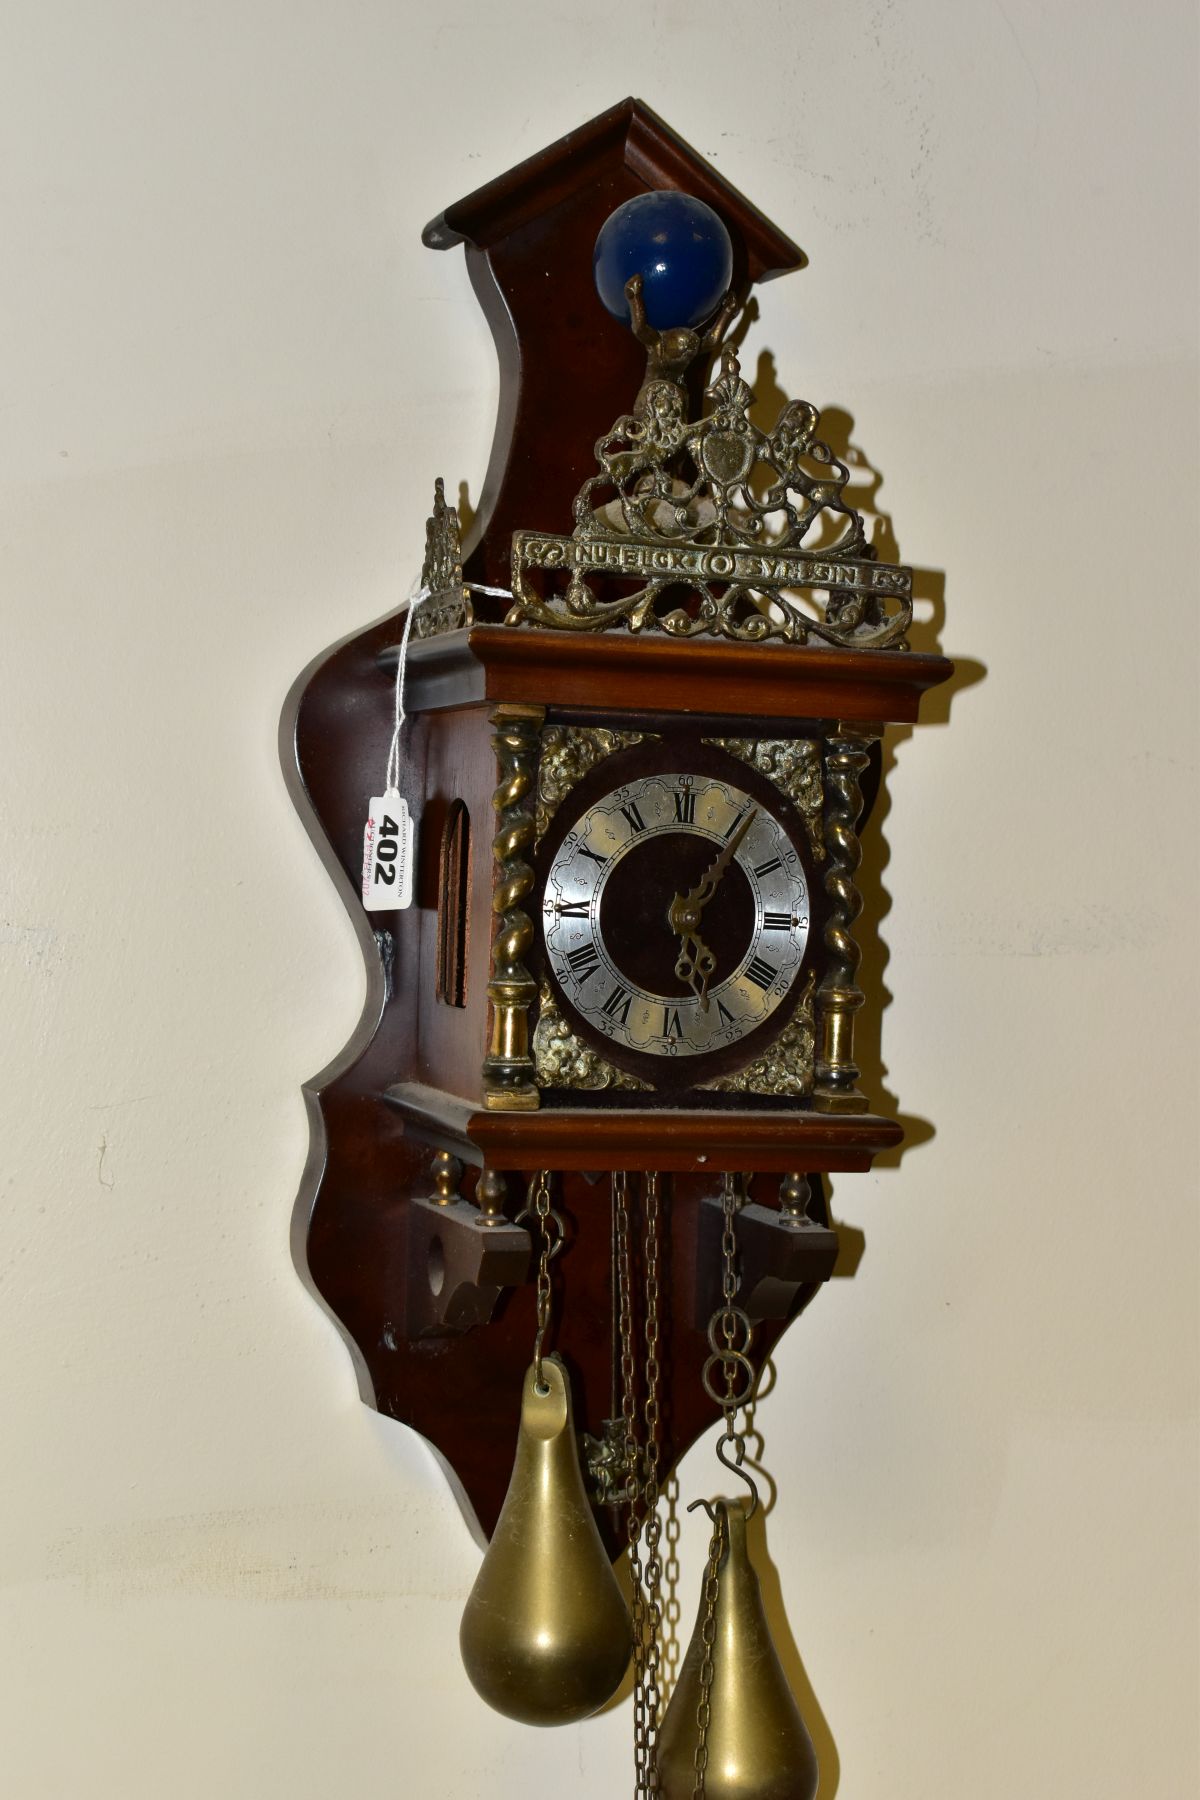 A REPRODUCTION DUTCH STYLE WALL CLOCK, with Atlas finial above, pierced gallery and crest, dial with